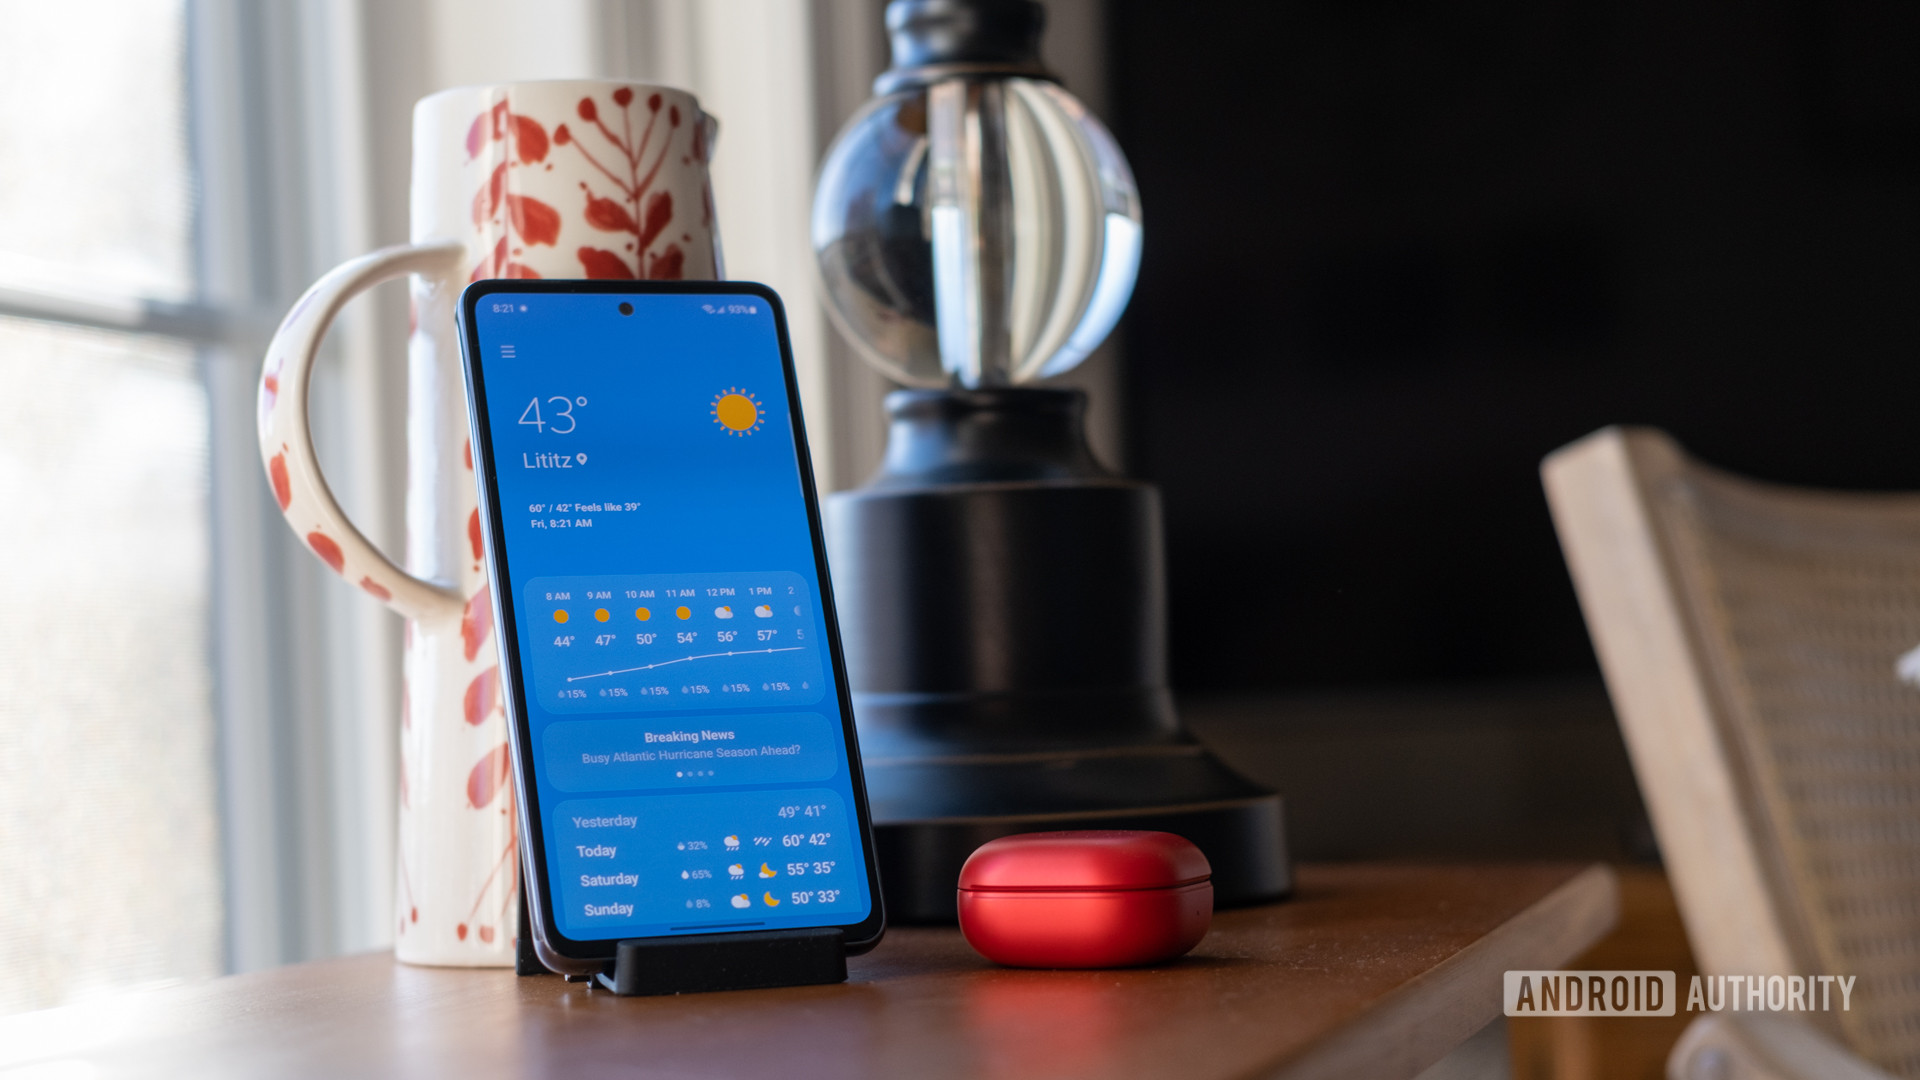 Samsung Galaxy A53 standing upright in a dock, showing weather app, with a red Galaxy Buds case next to it.